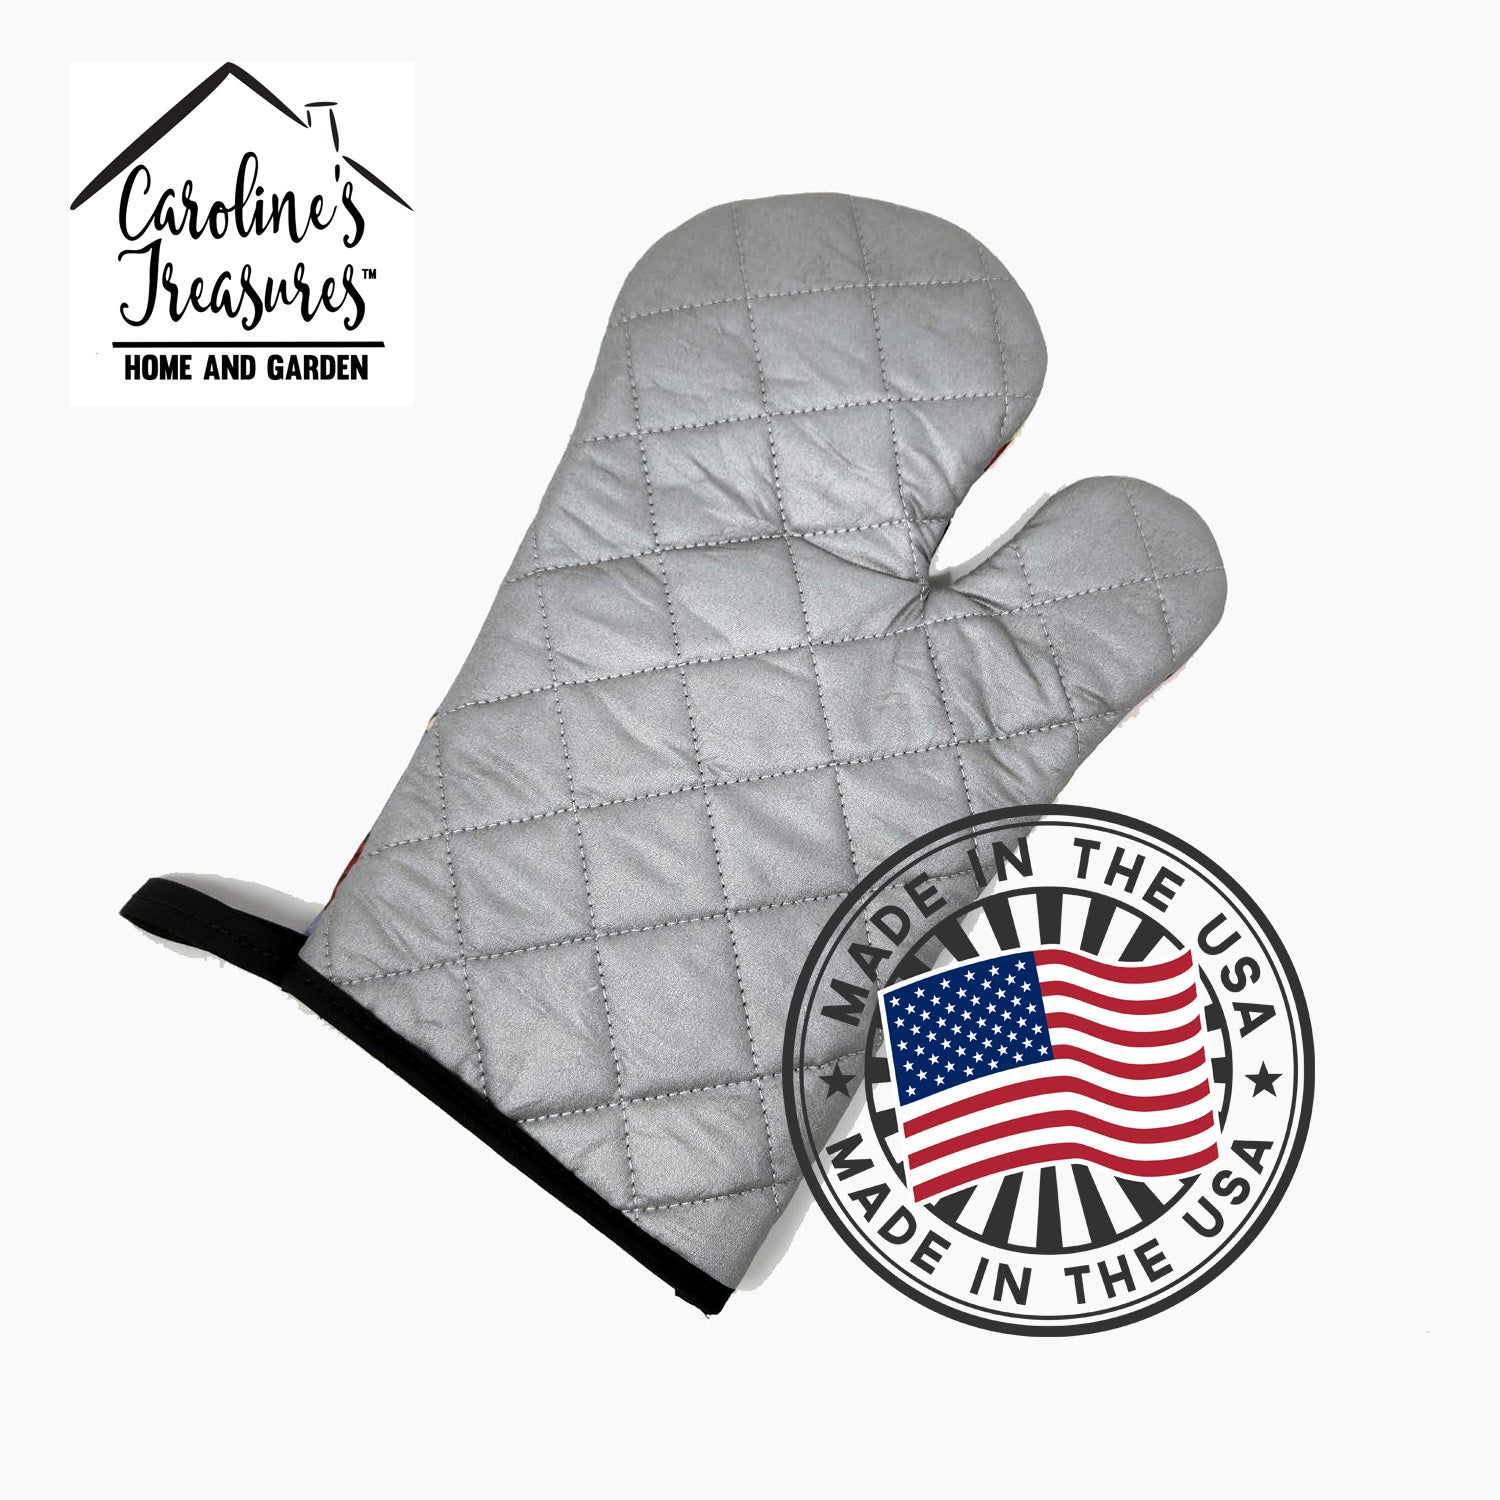 English Toy Spaniel Oven Mitt 7170OVMT  the-store.com.